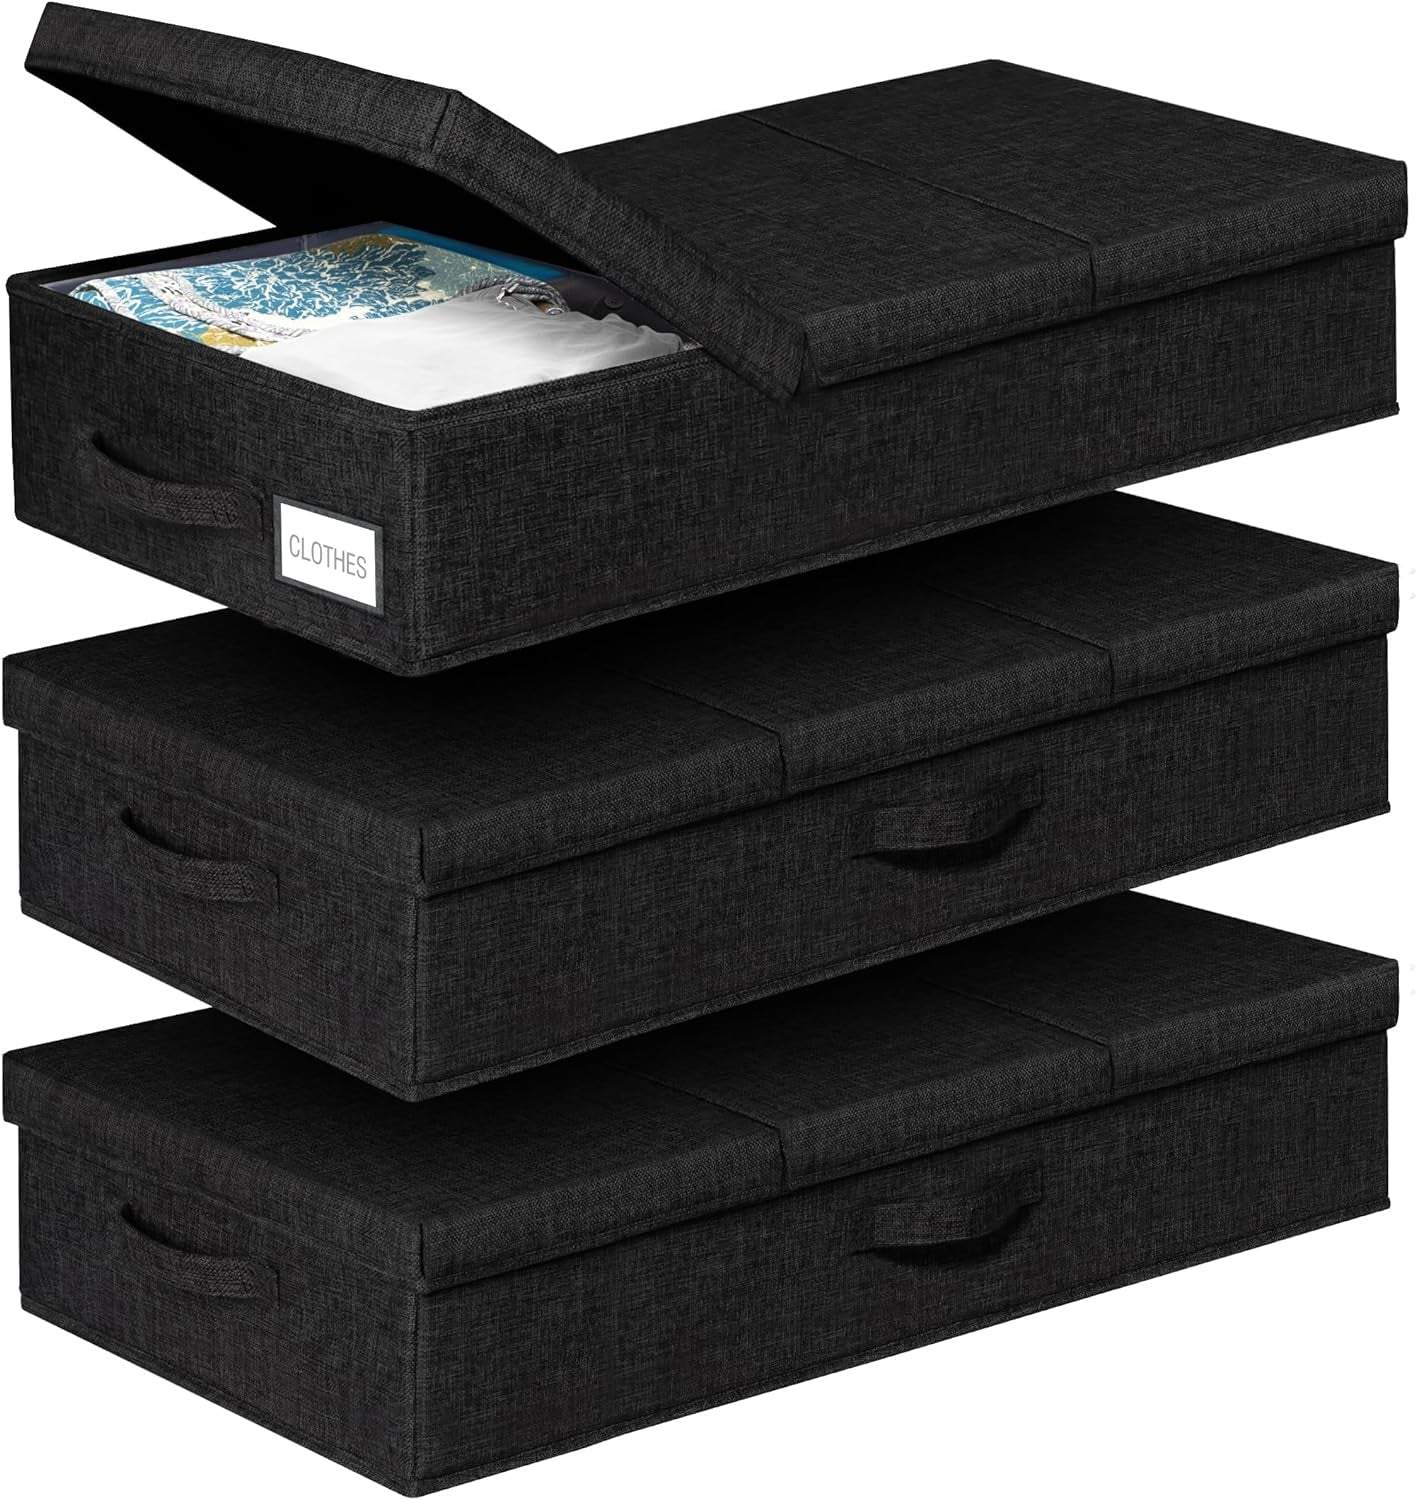 under the Bed Storage Containers 6 Inch High, 2 Pack Flat Storage Bins with Lids, Large Clothes Storage Sturdy Structure, Apartment Storage Ideas, Home Organization Must Haves, Dark Grey